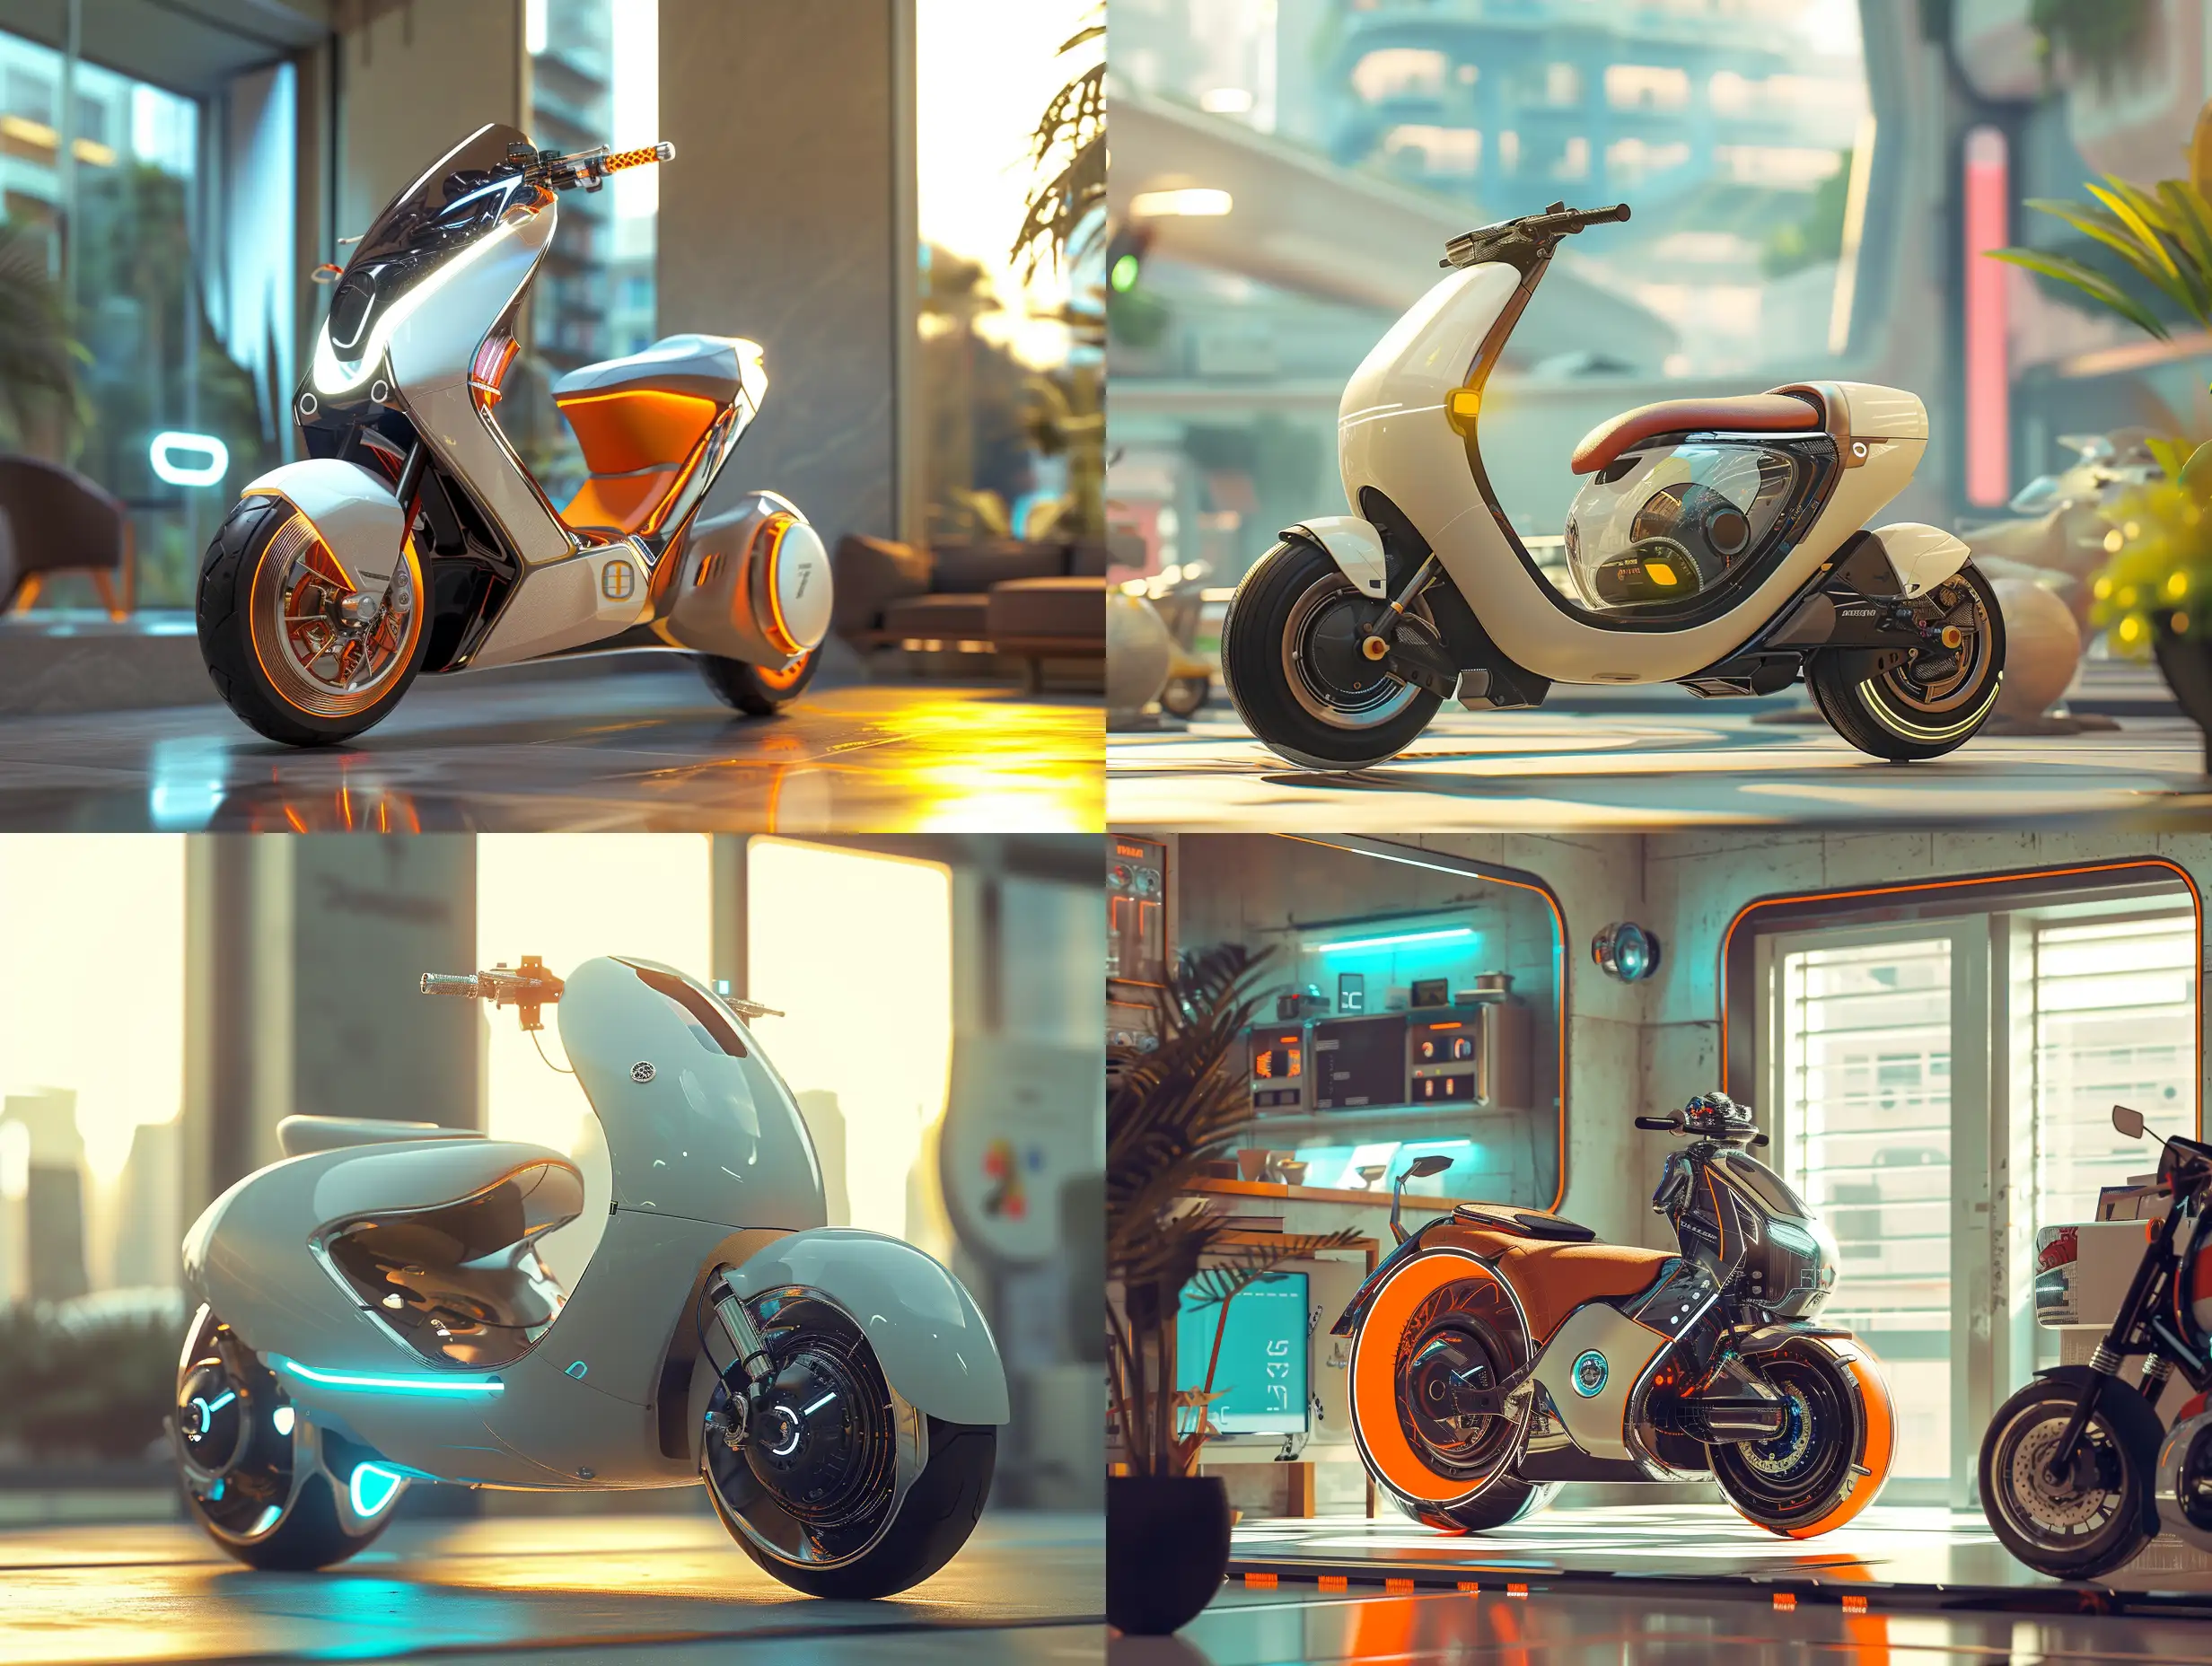 Futuristic-Scooter-Showcase-HighTech-Masterpiece-in-Afternoon-Light